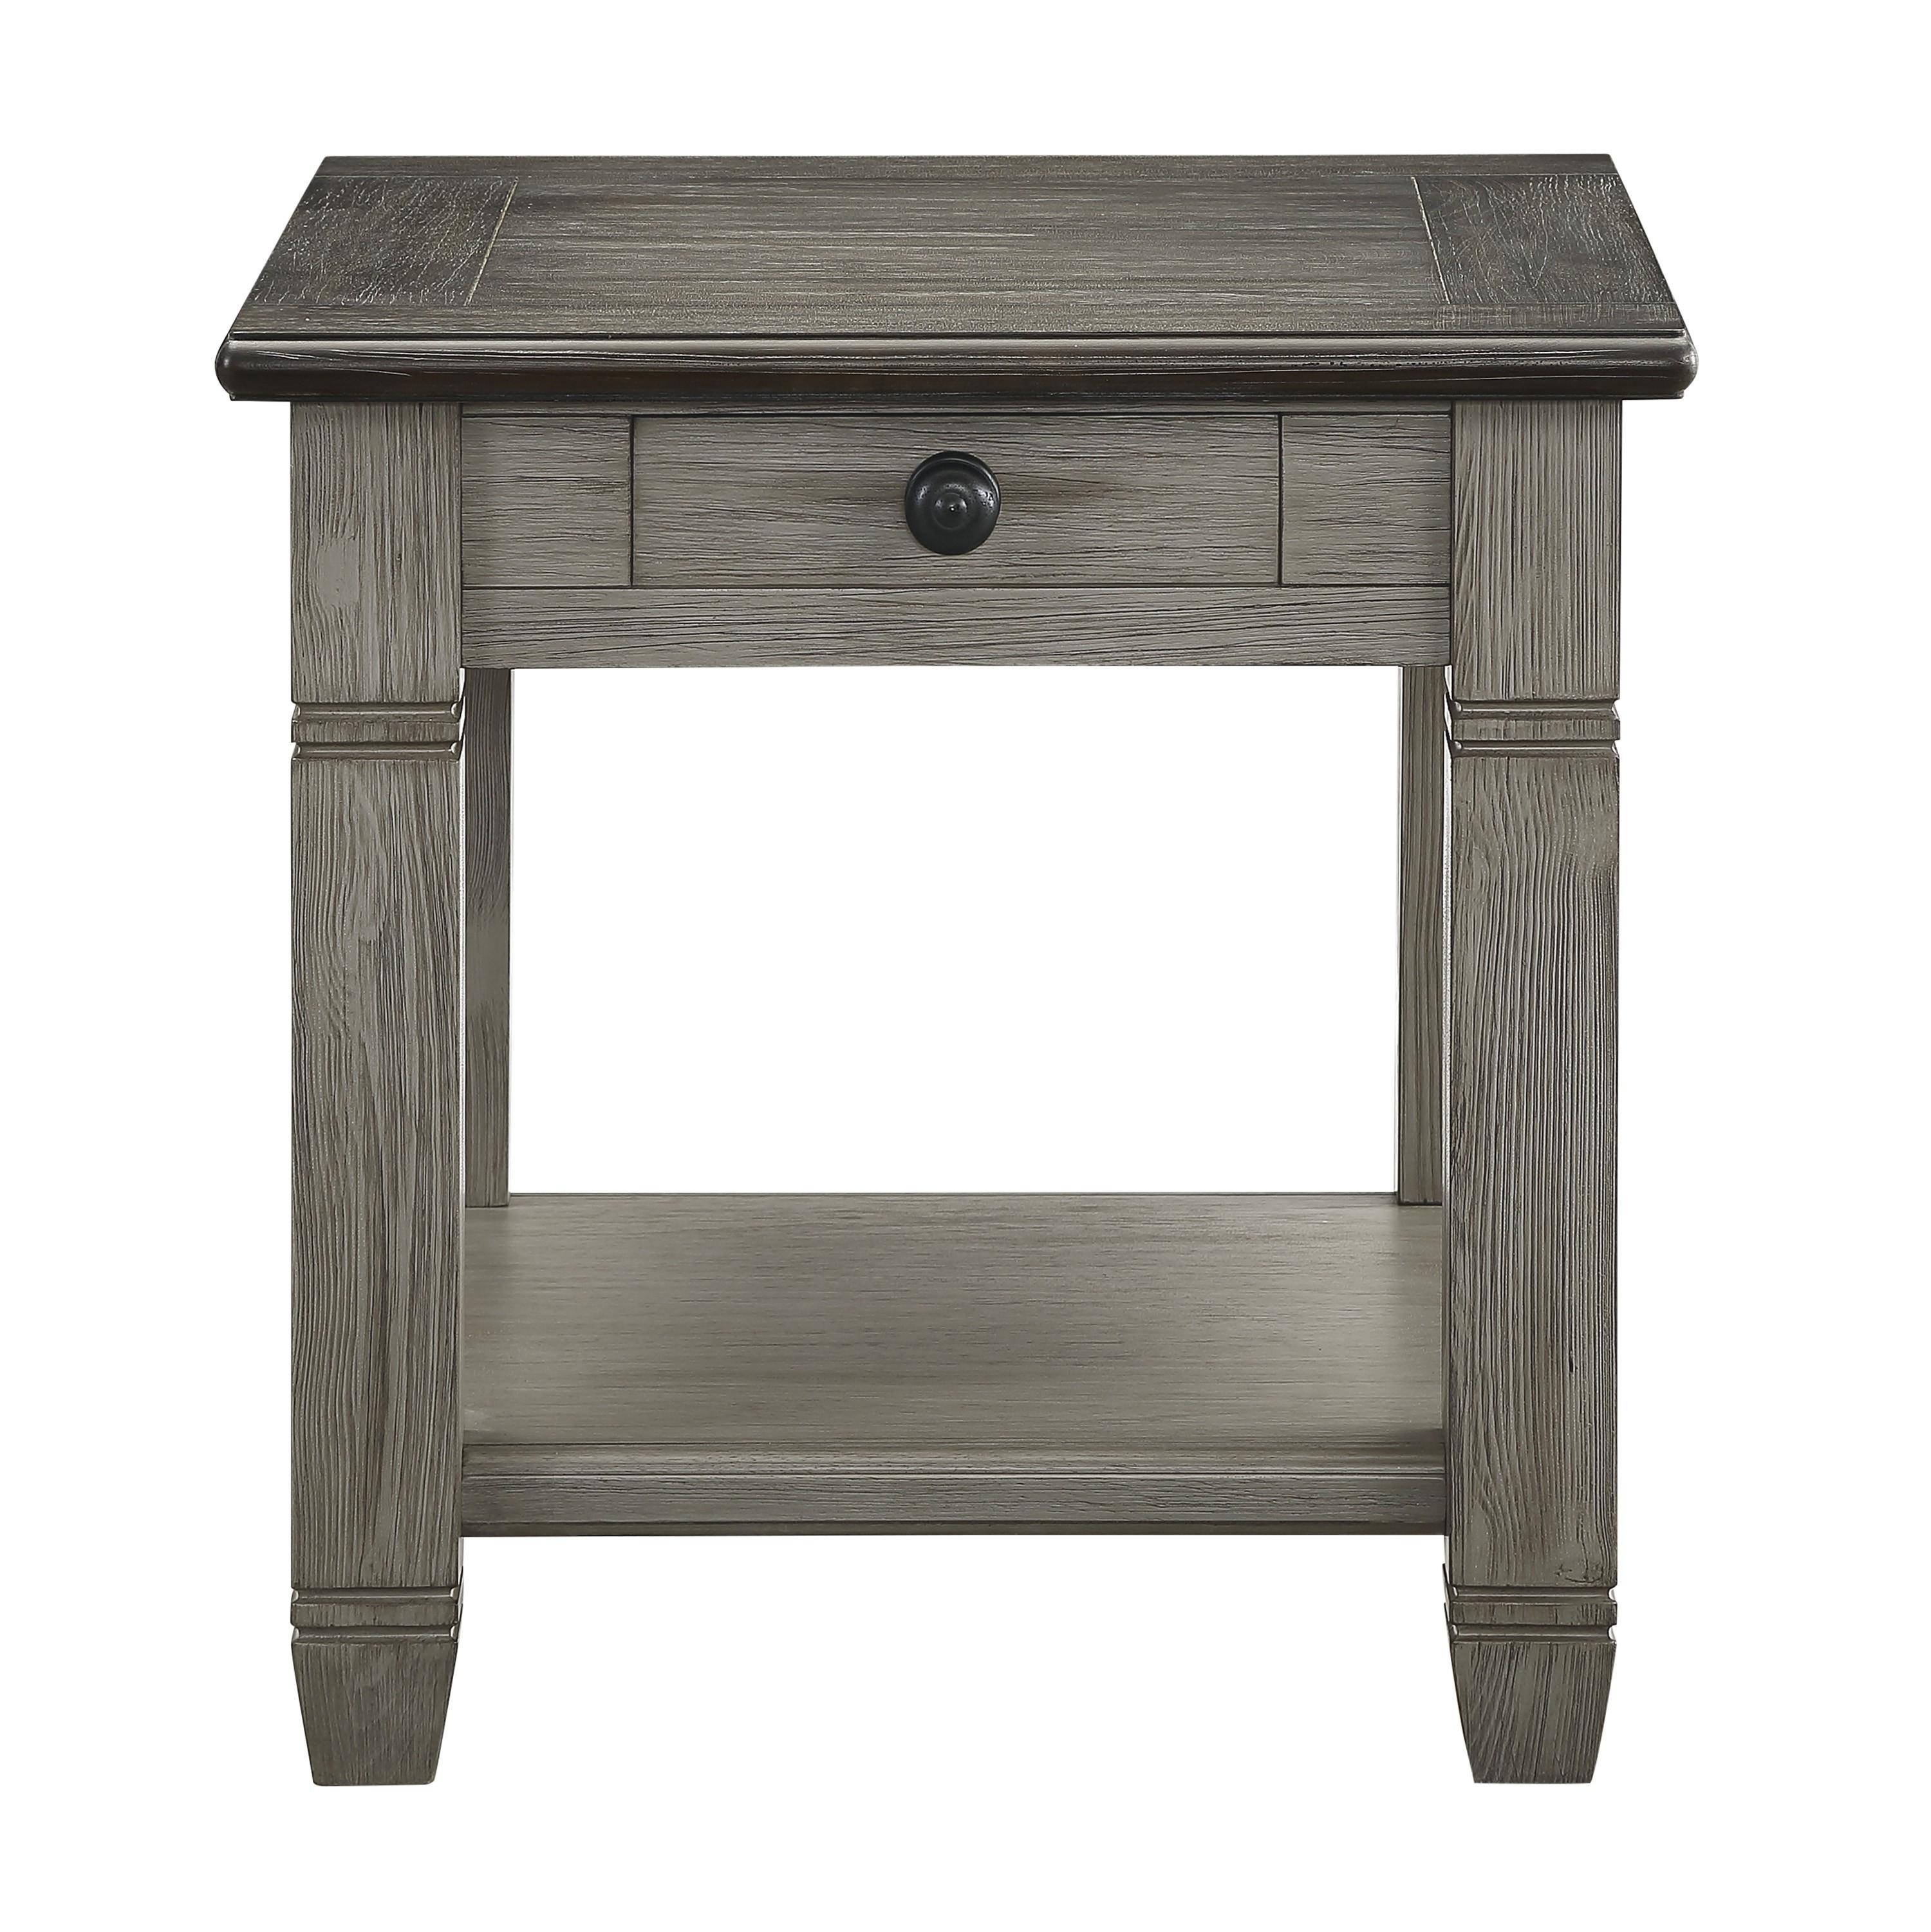 Cottage End Table 5627GY-04 Granby 5627GY-04 in Gray, Coffee 